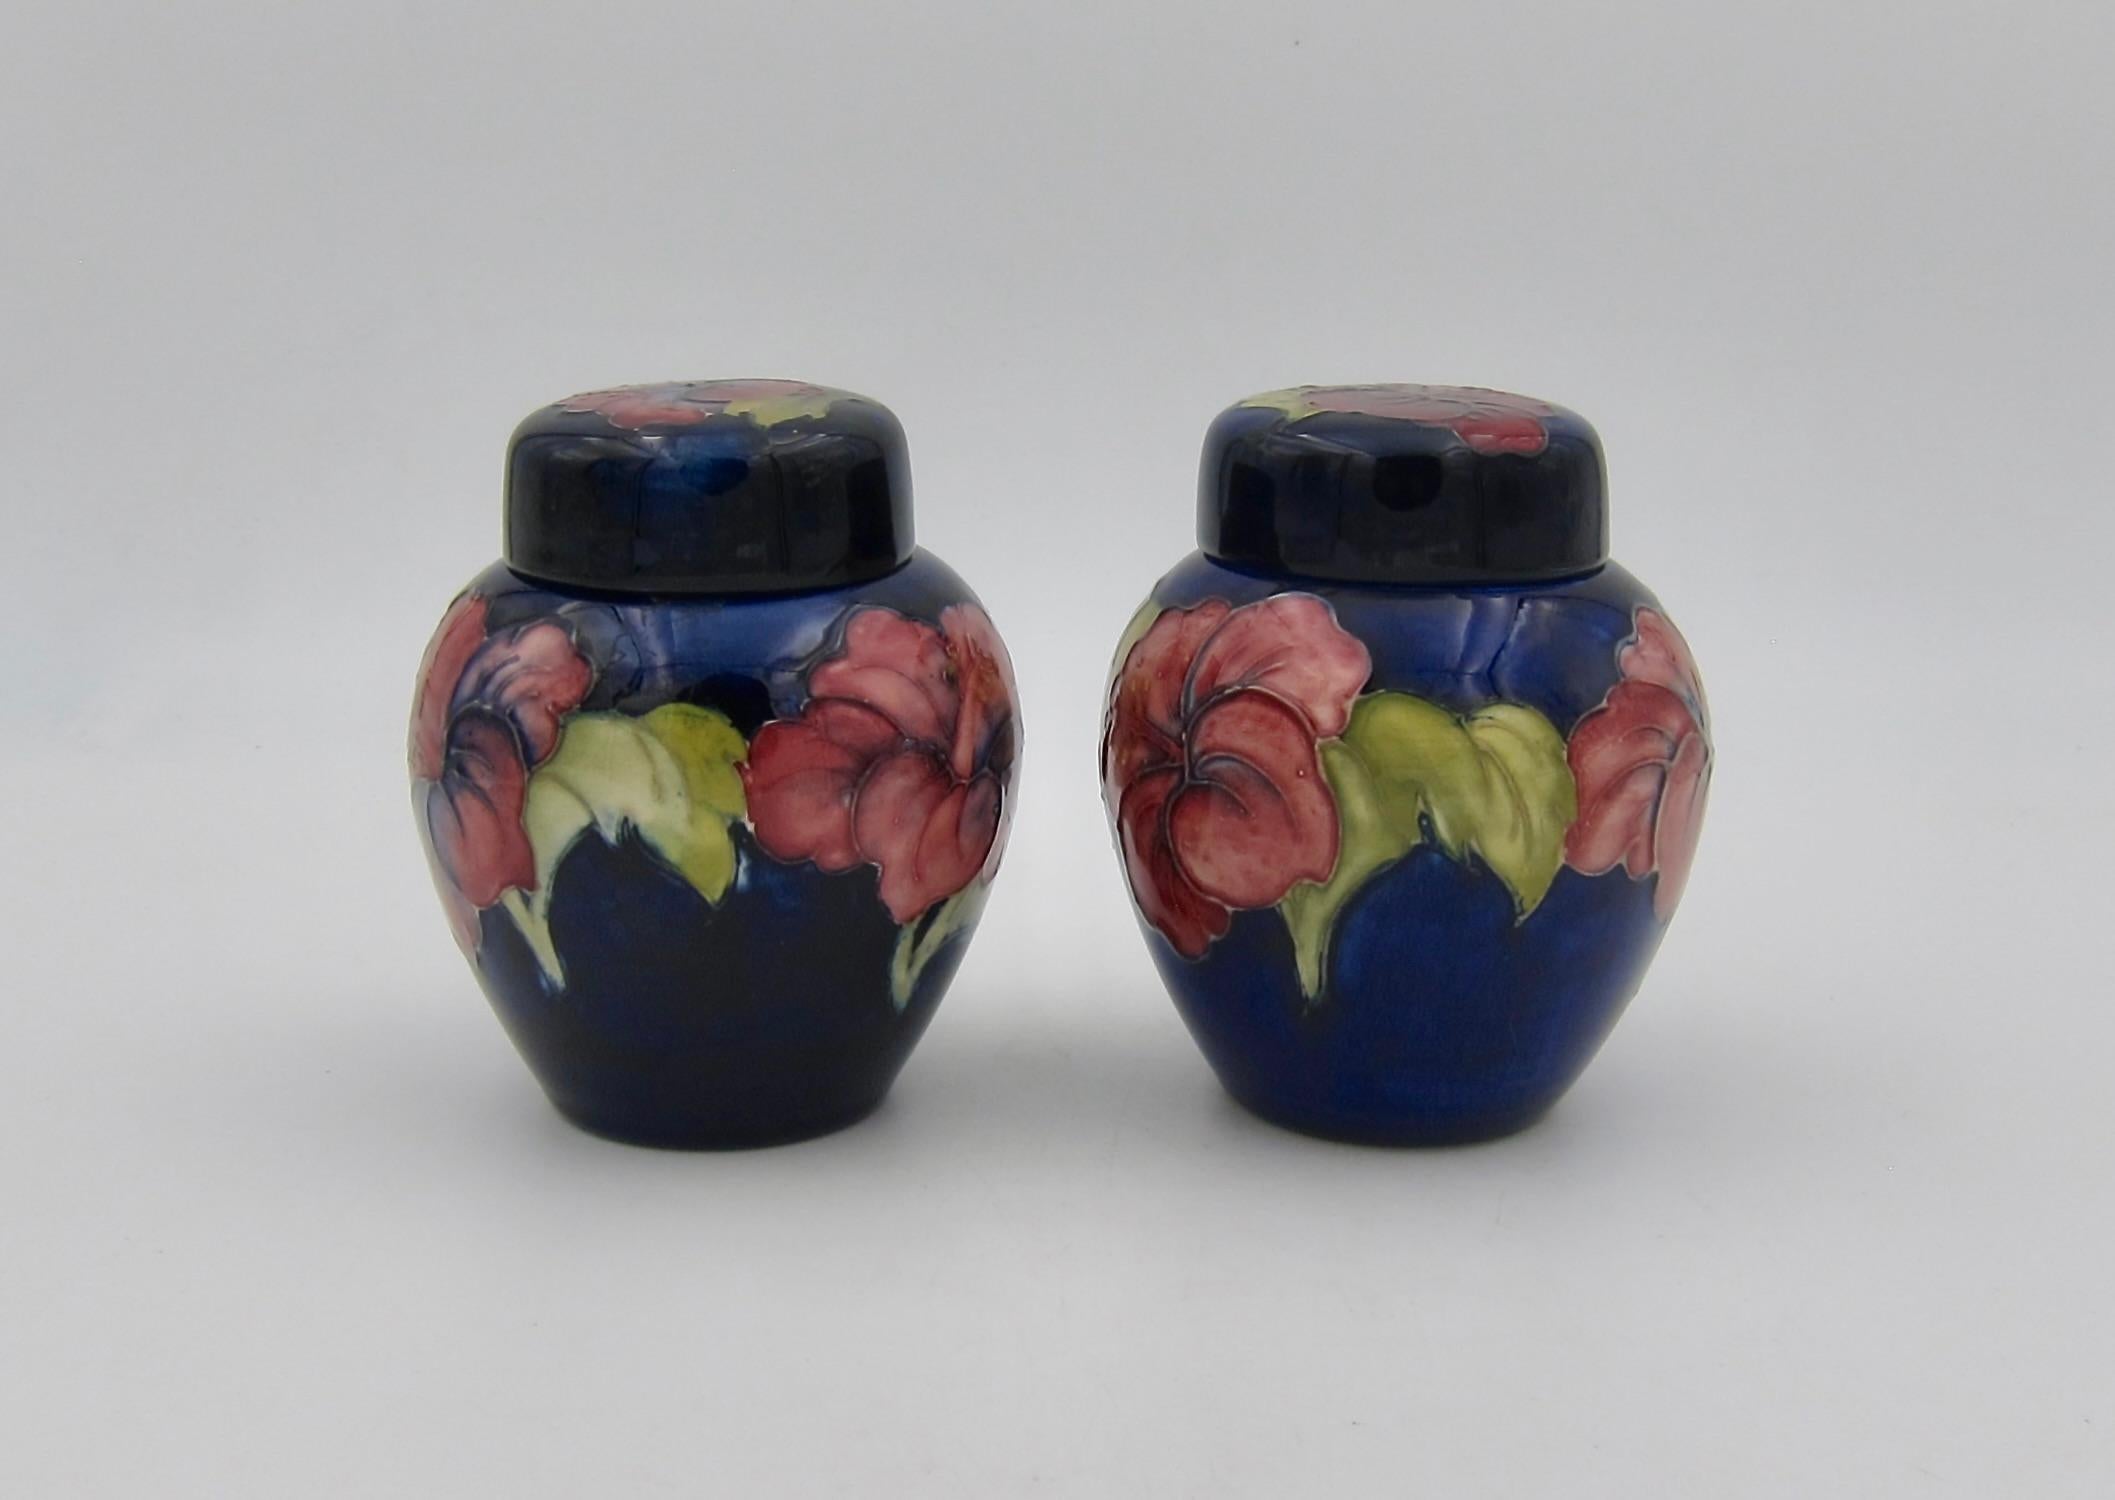 Two vintage Moorcroft art pottery ginger jars in the hibiscus pattern, manufactured at the Moorcroft Pottery at Stoke-on-Trent in Staffordshire, England. Each two piece jar features a ring of colorful tube-lined, hand-painted hibiscus blossoms in